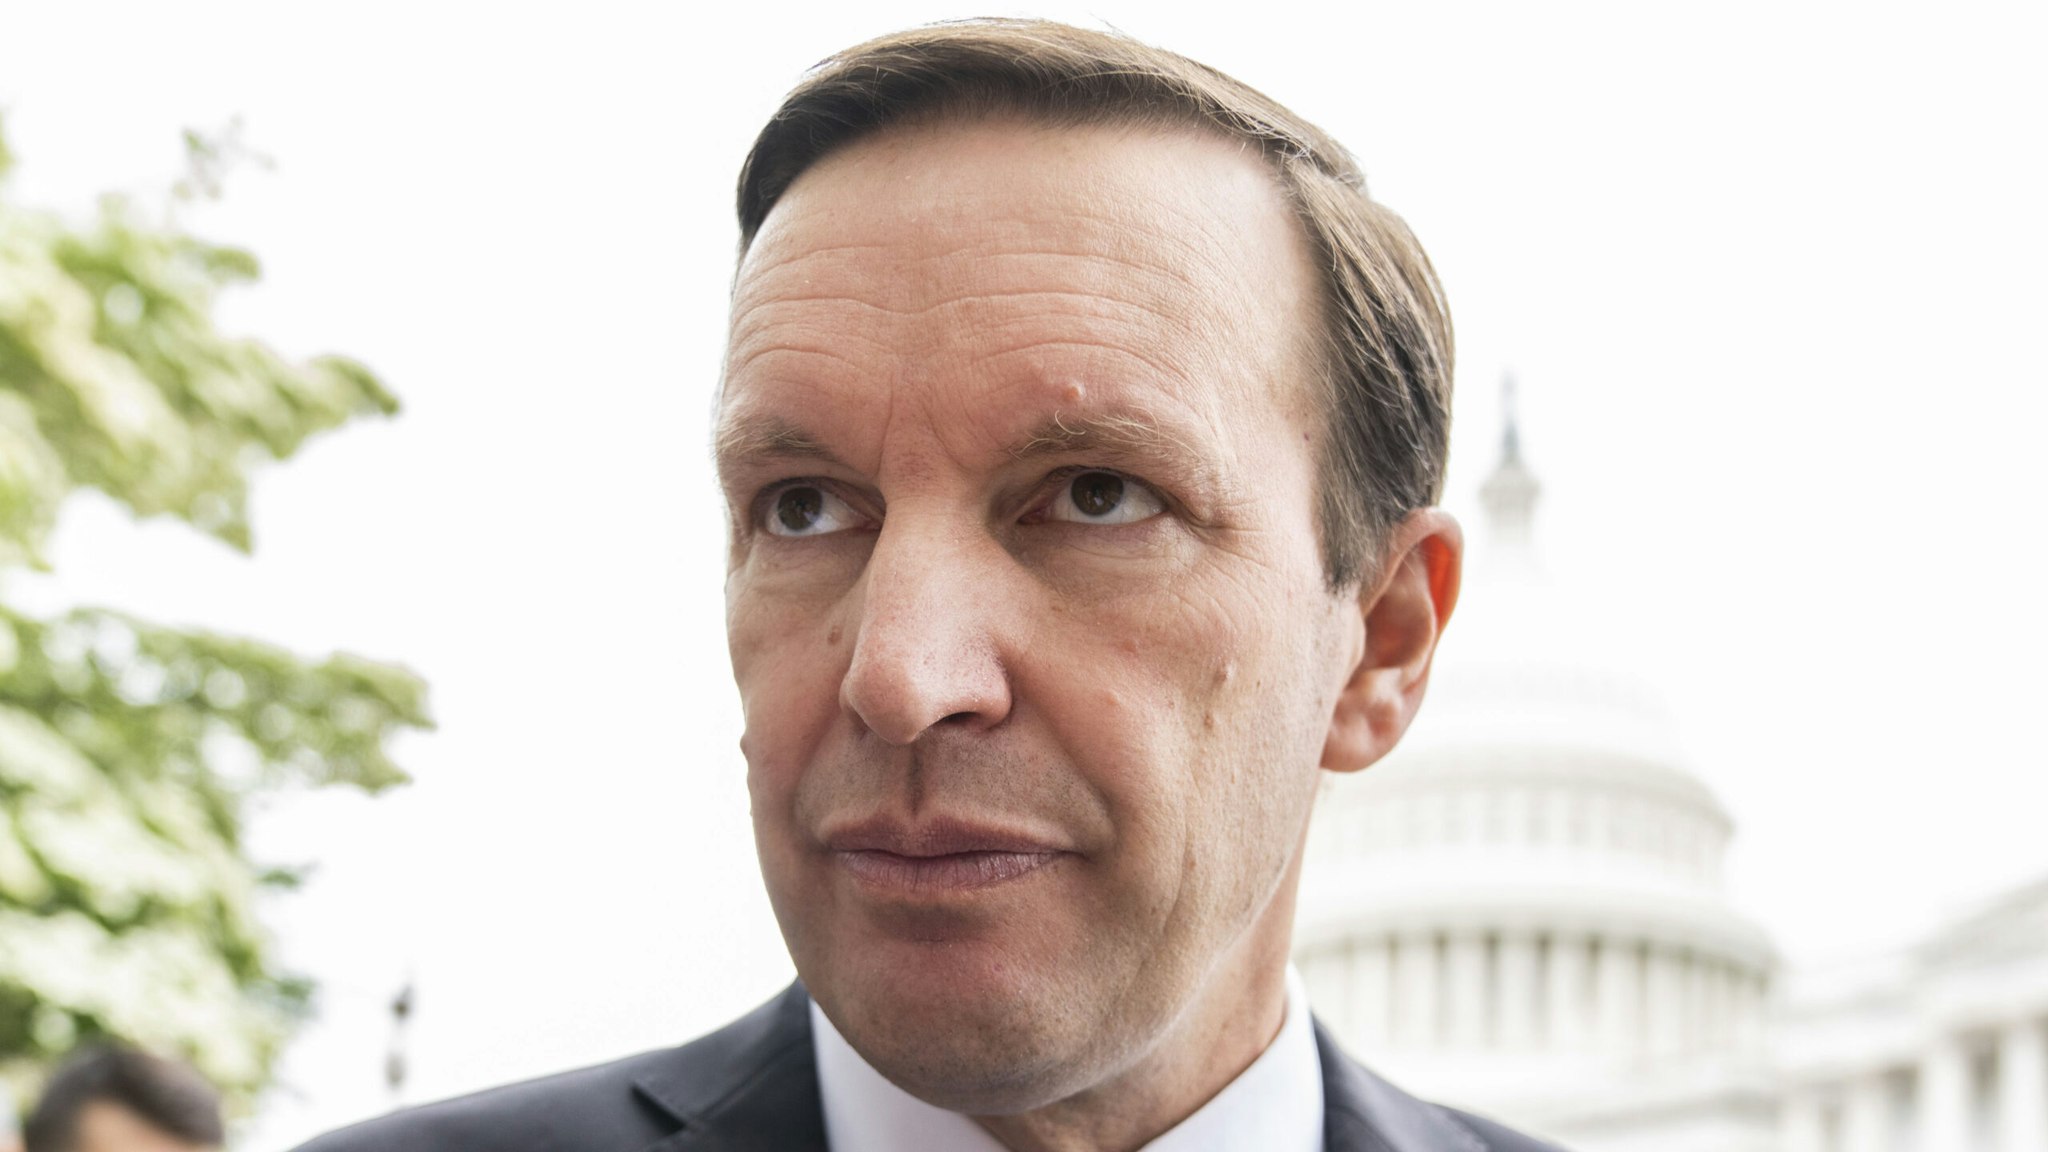 UNITED STATES - MAY 26: Sen. Chris Murphy, D-Conn., talks with reporters during rally outside the U.S. Capitol to demand the Senate take action on gun safety on Thursday, May 26, 2022, in the wake of the Robb Elementary School shooting in Texas.